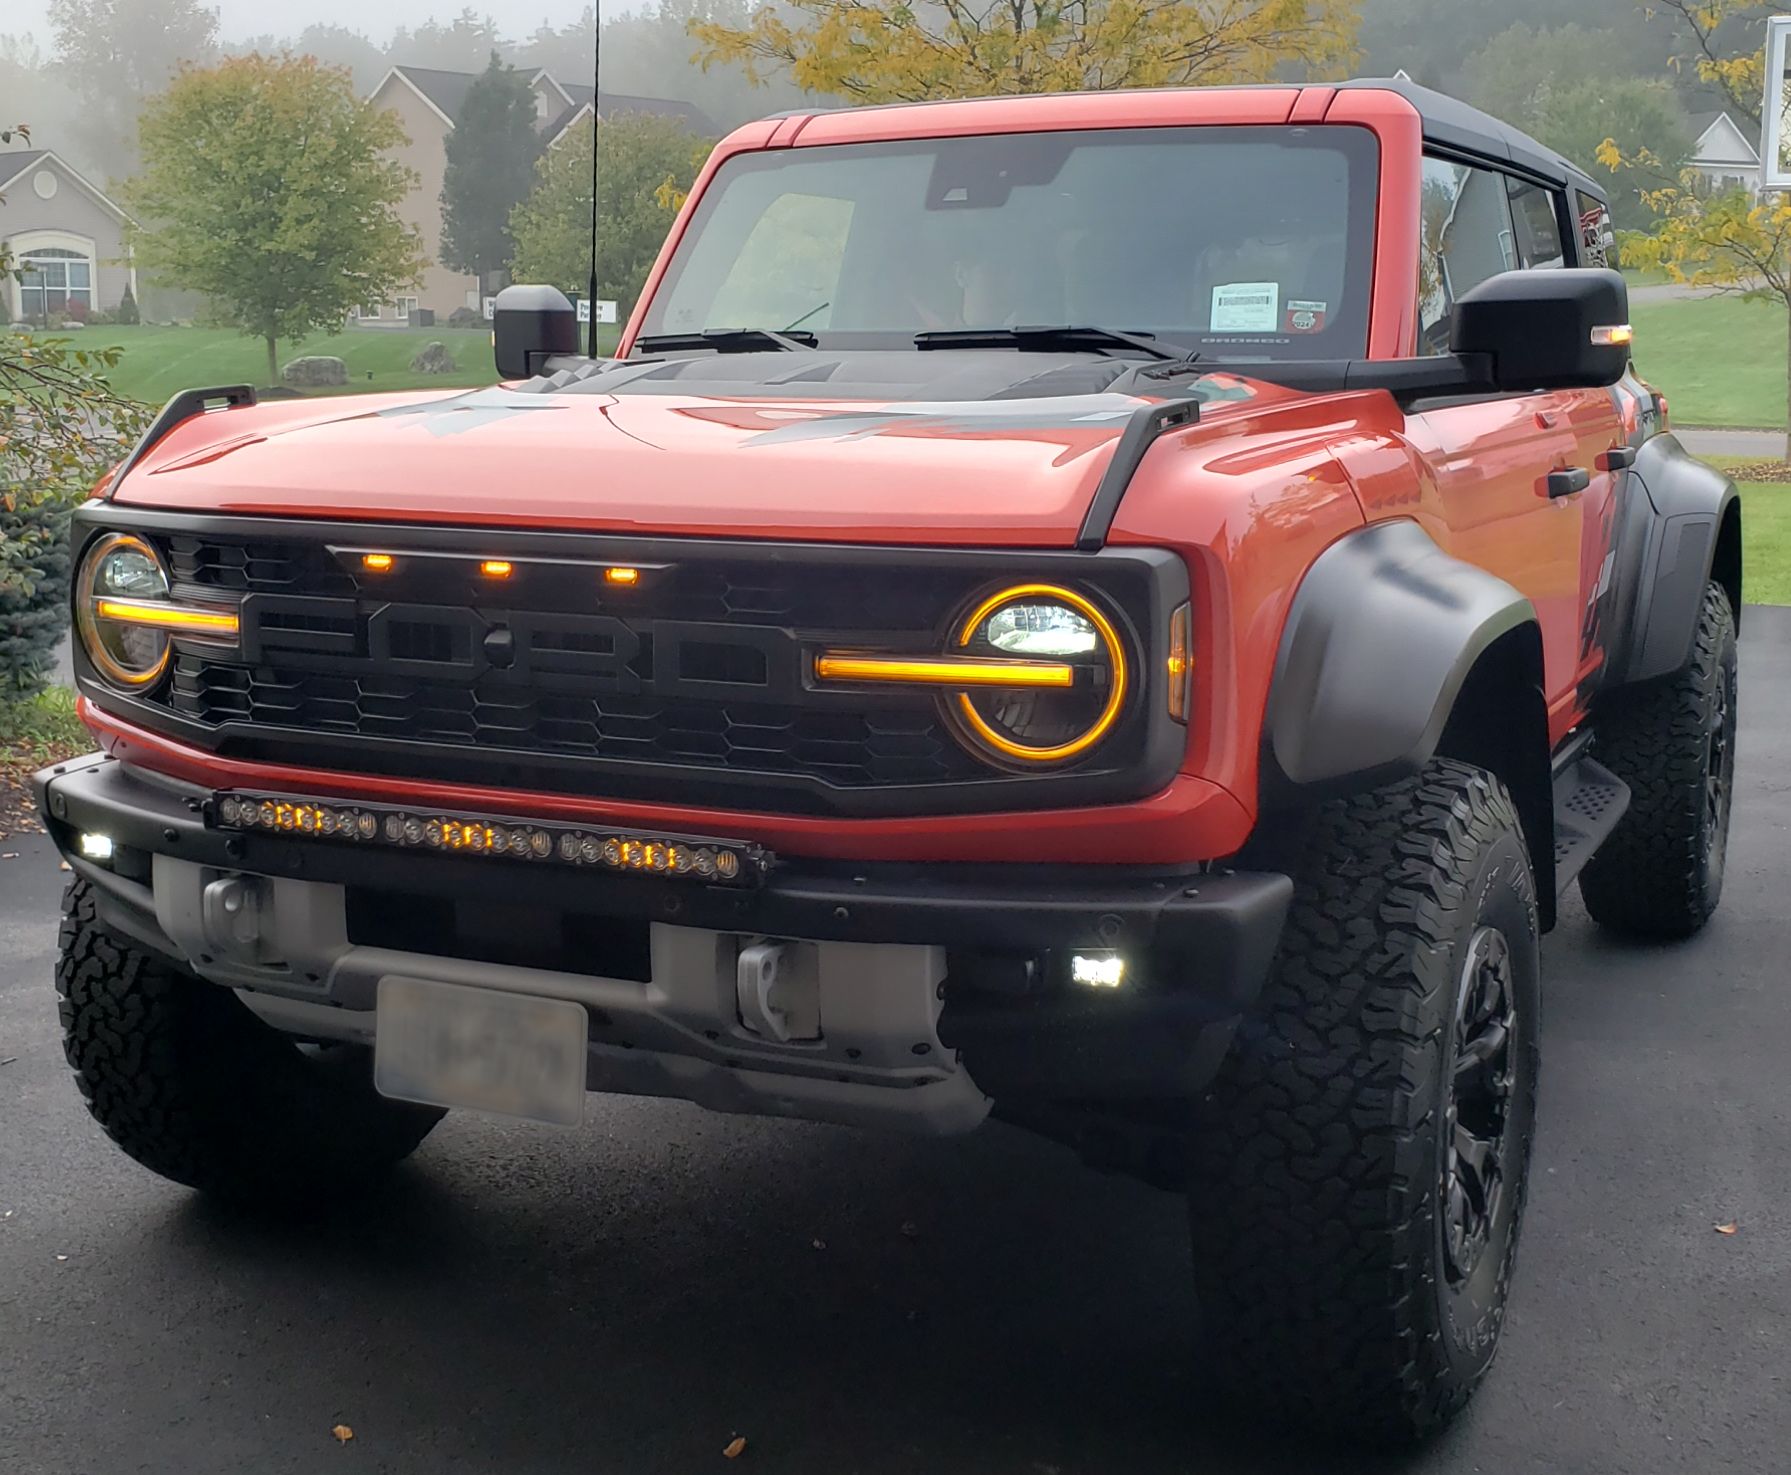 Ford Bronco TopLift Pros OCTOBER GIVEAWAY - WIN A $1,000 TOPLIFT PROS GIFT CARD brap1